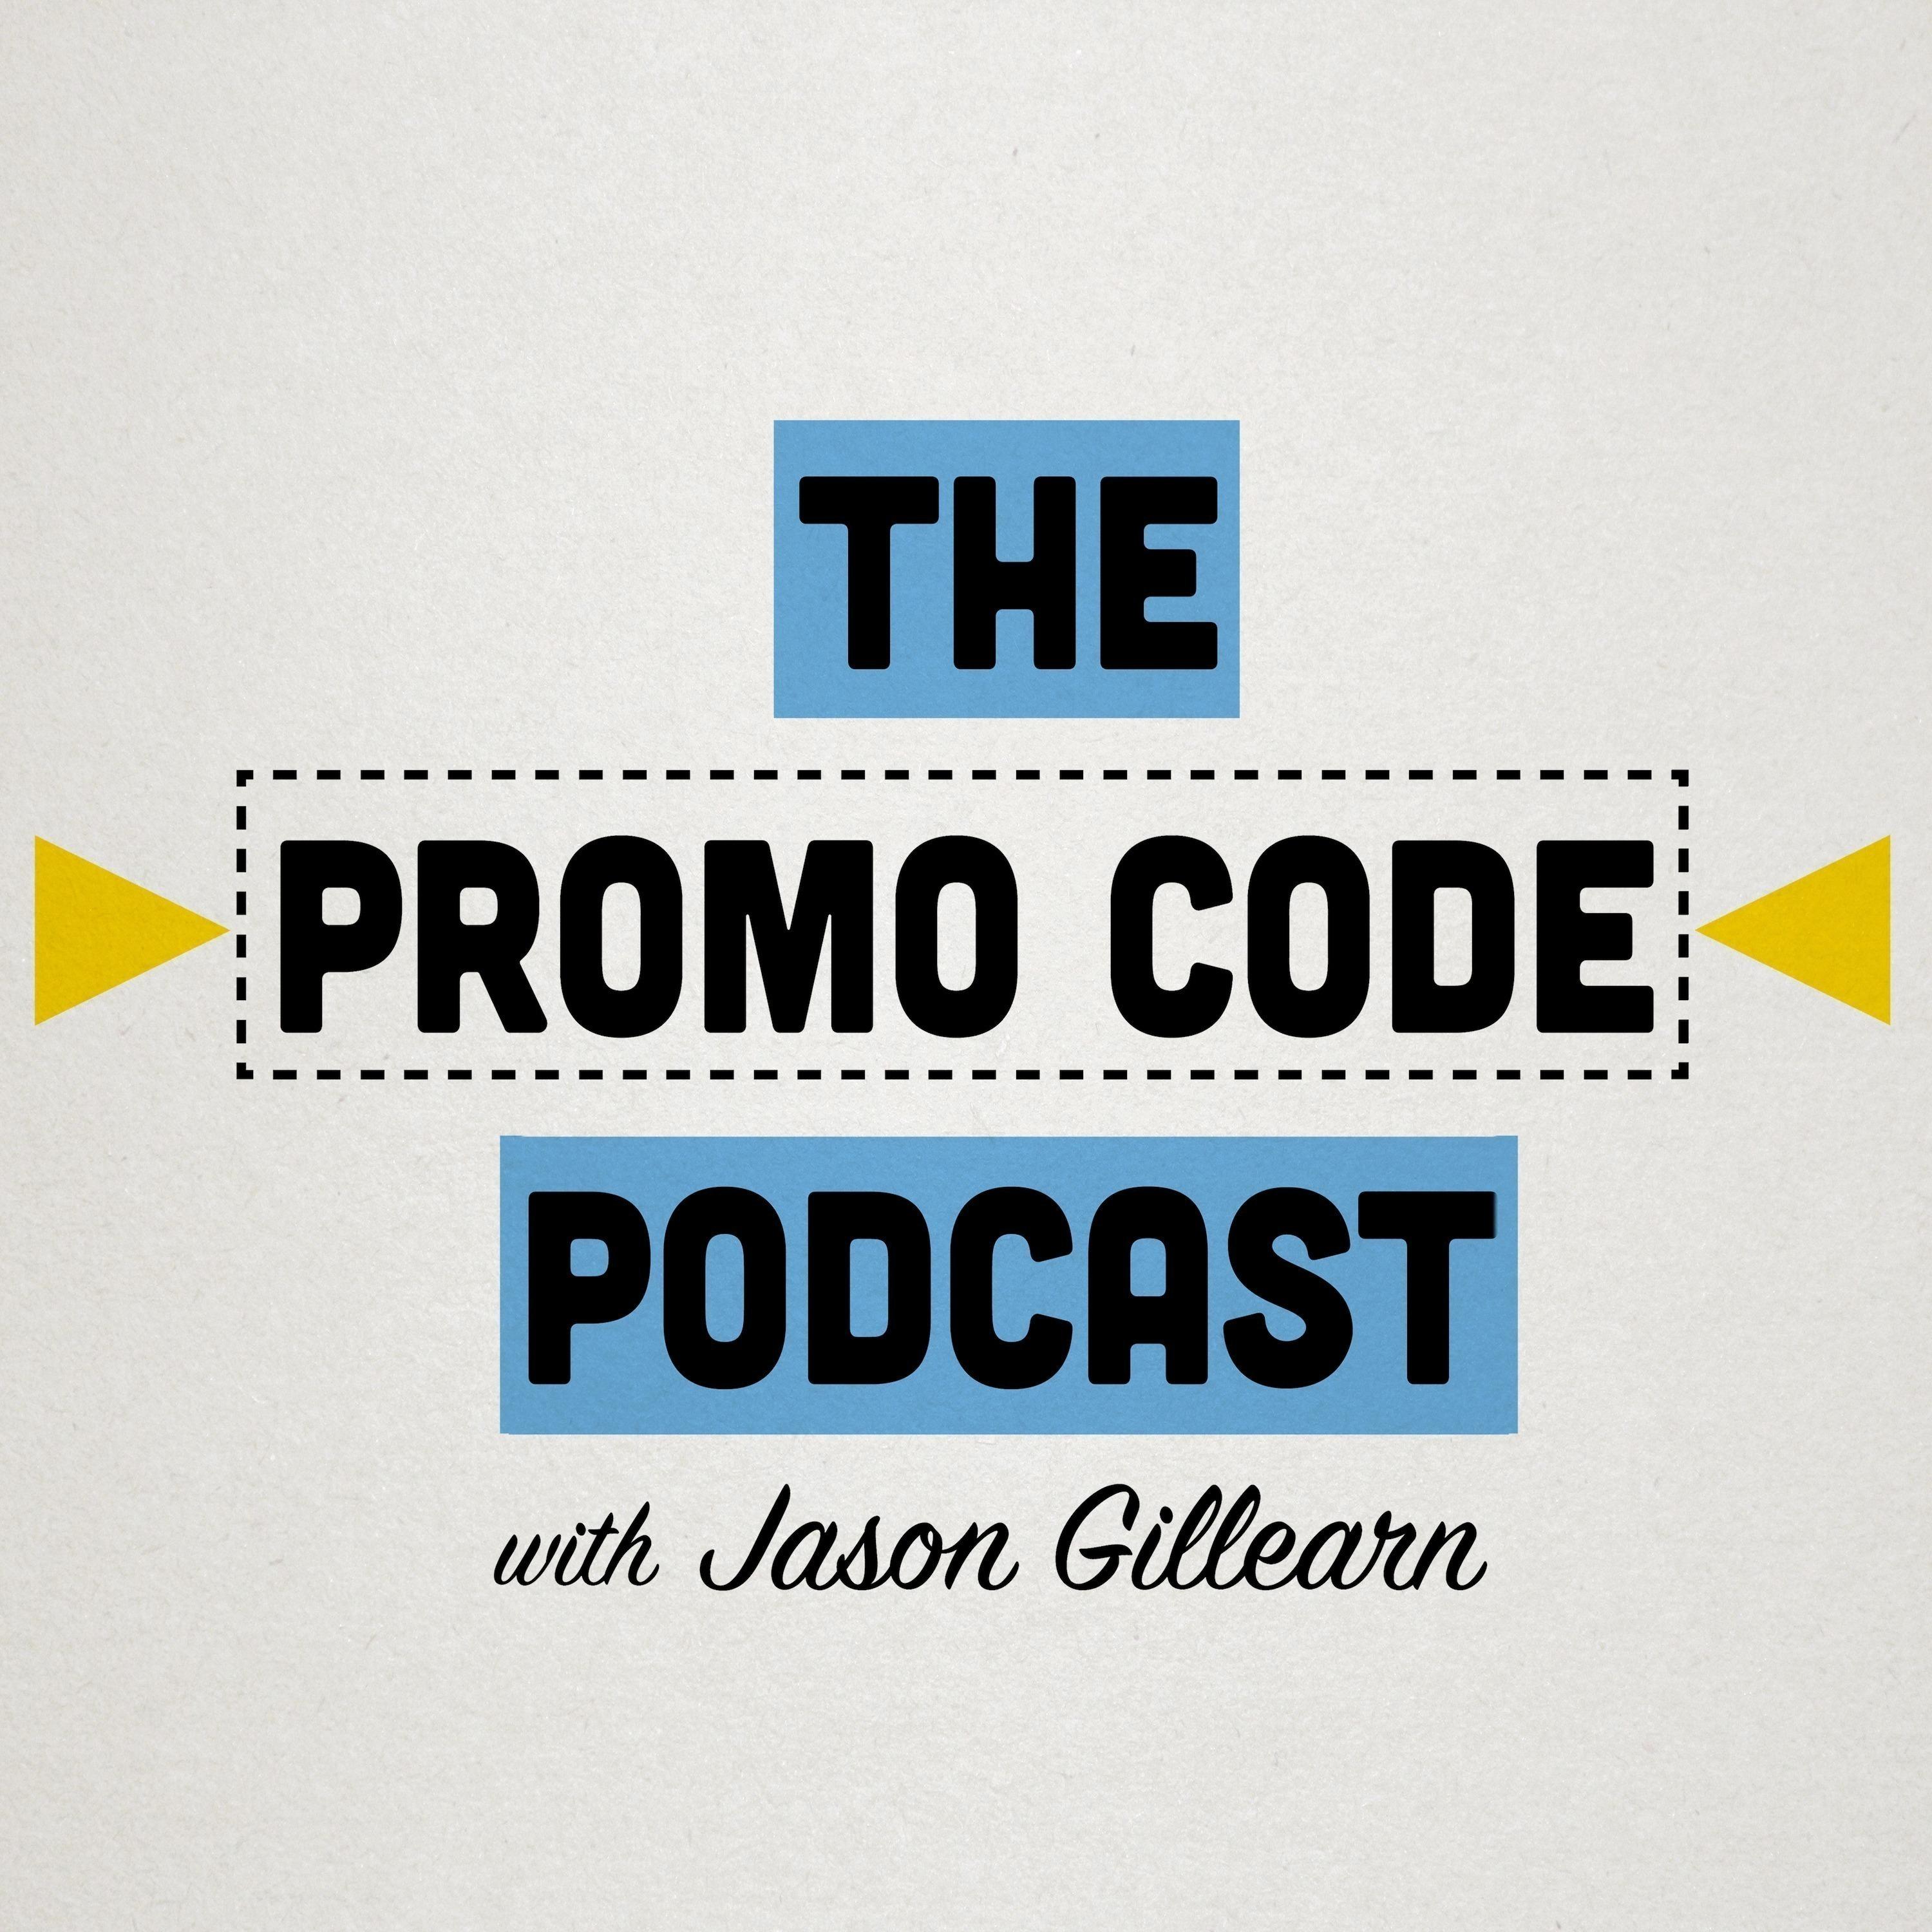 The Promo Code Podcast with Jason Gillearn